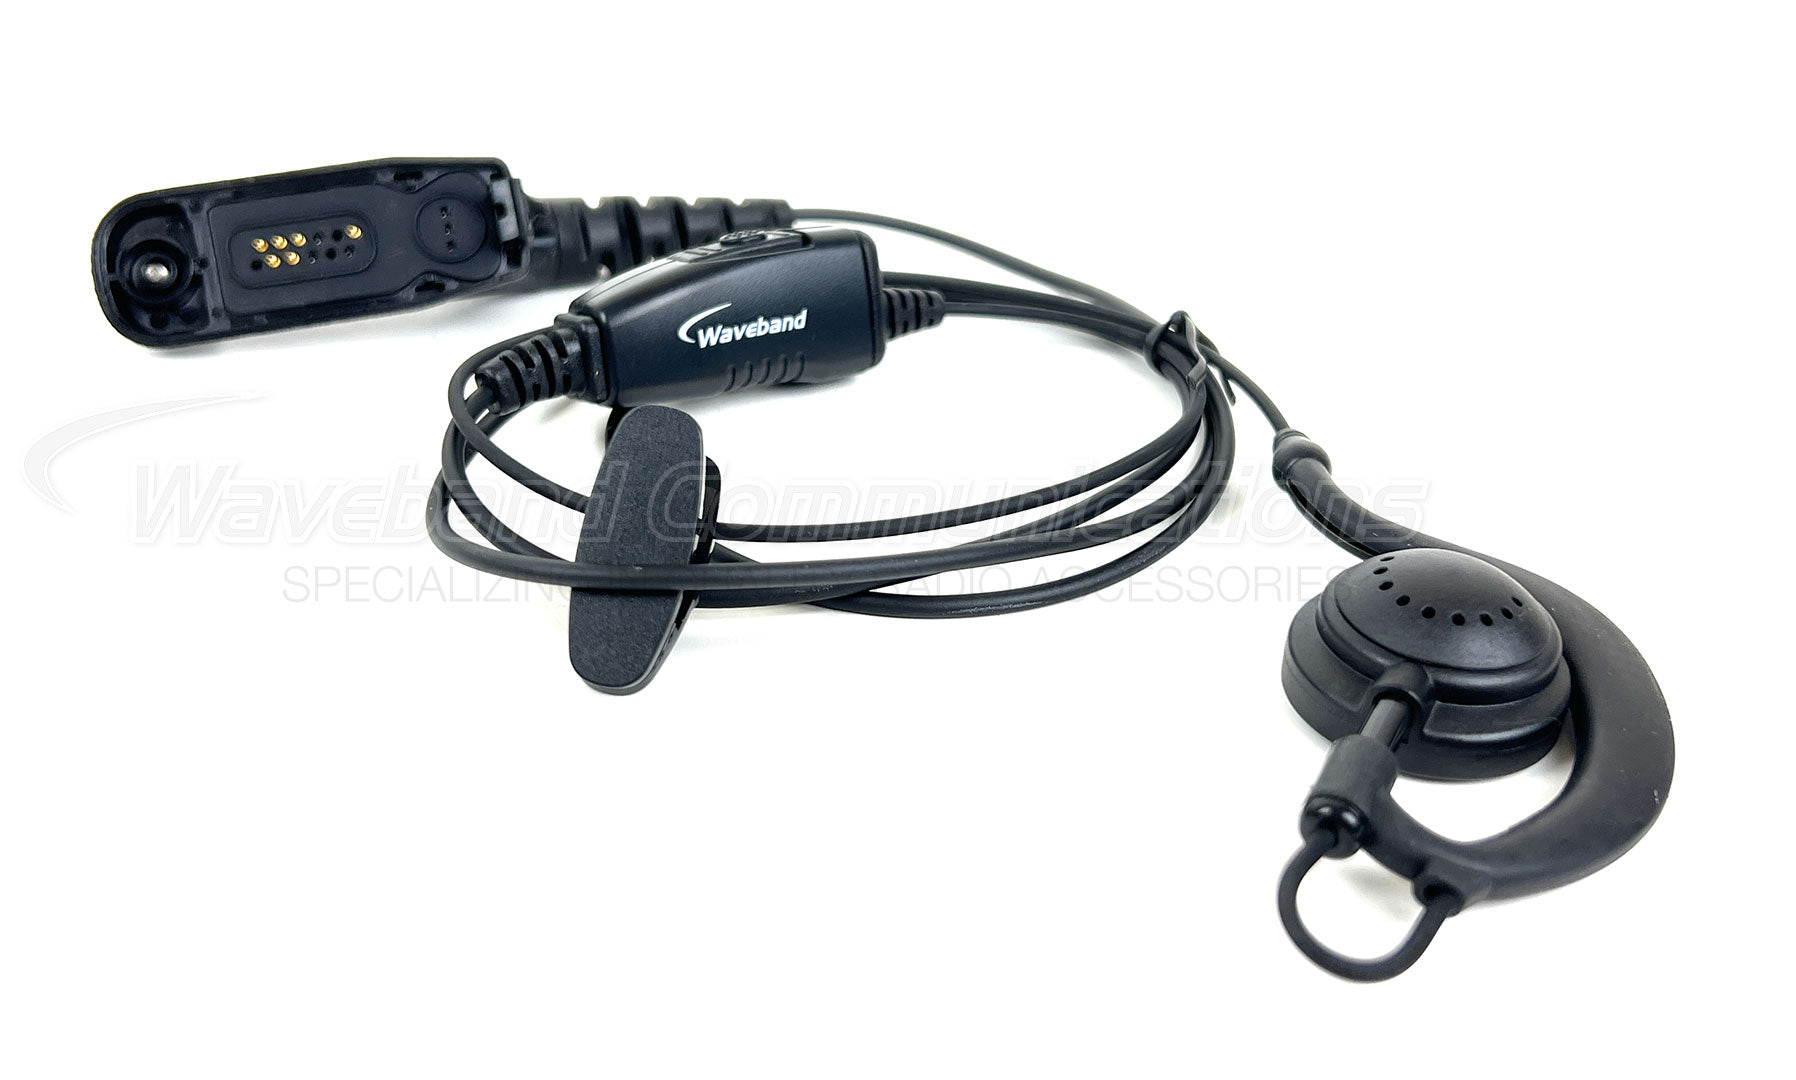 Motorola XPR6300 One Wire Surveillance Kit with Loop Earpiece